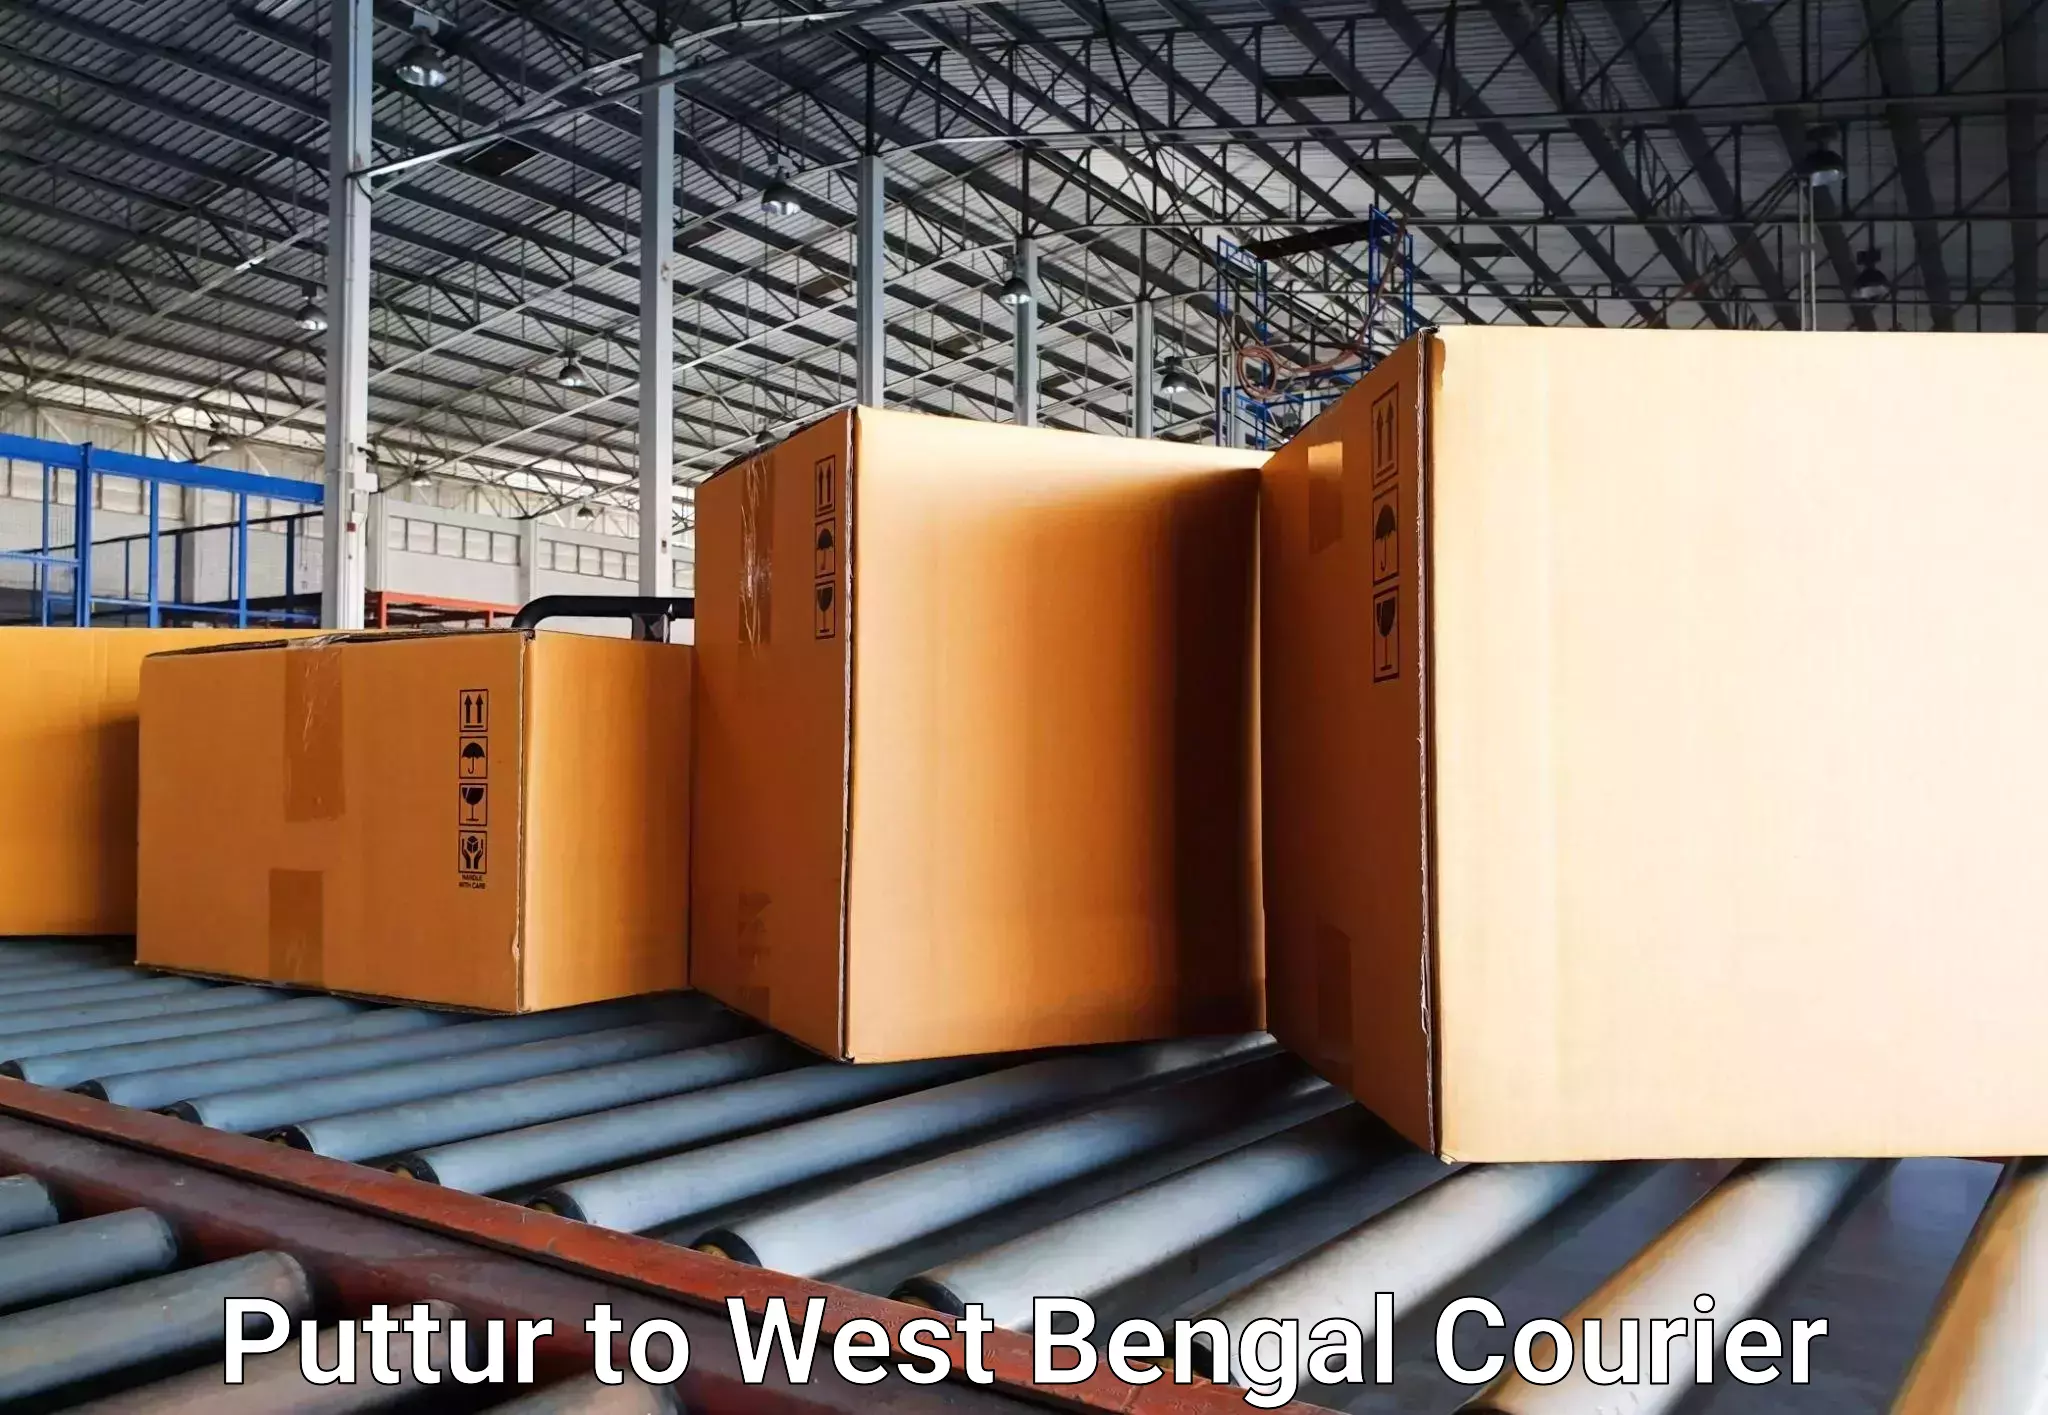 Luggage transport company Puttur to West Bengal